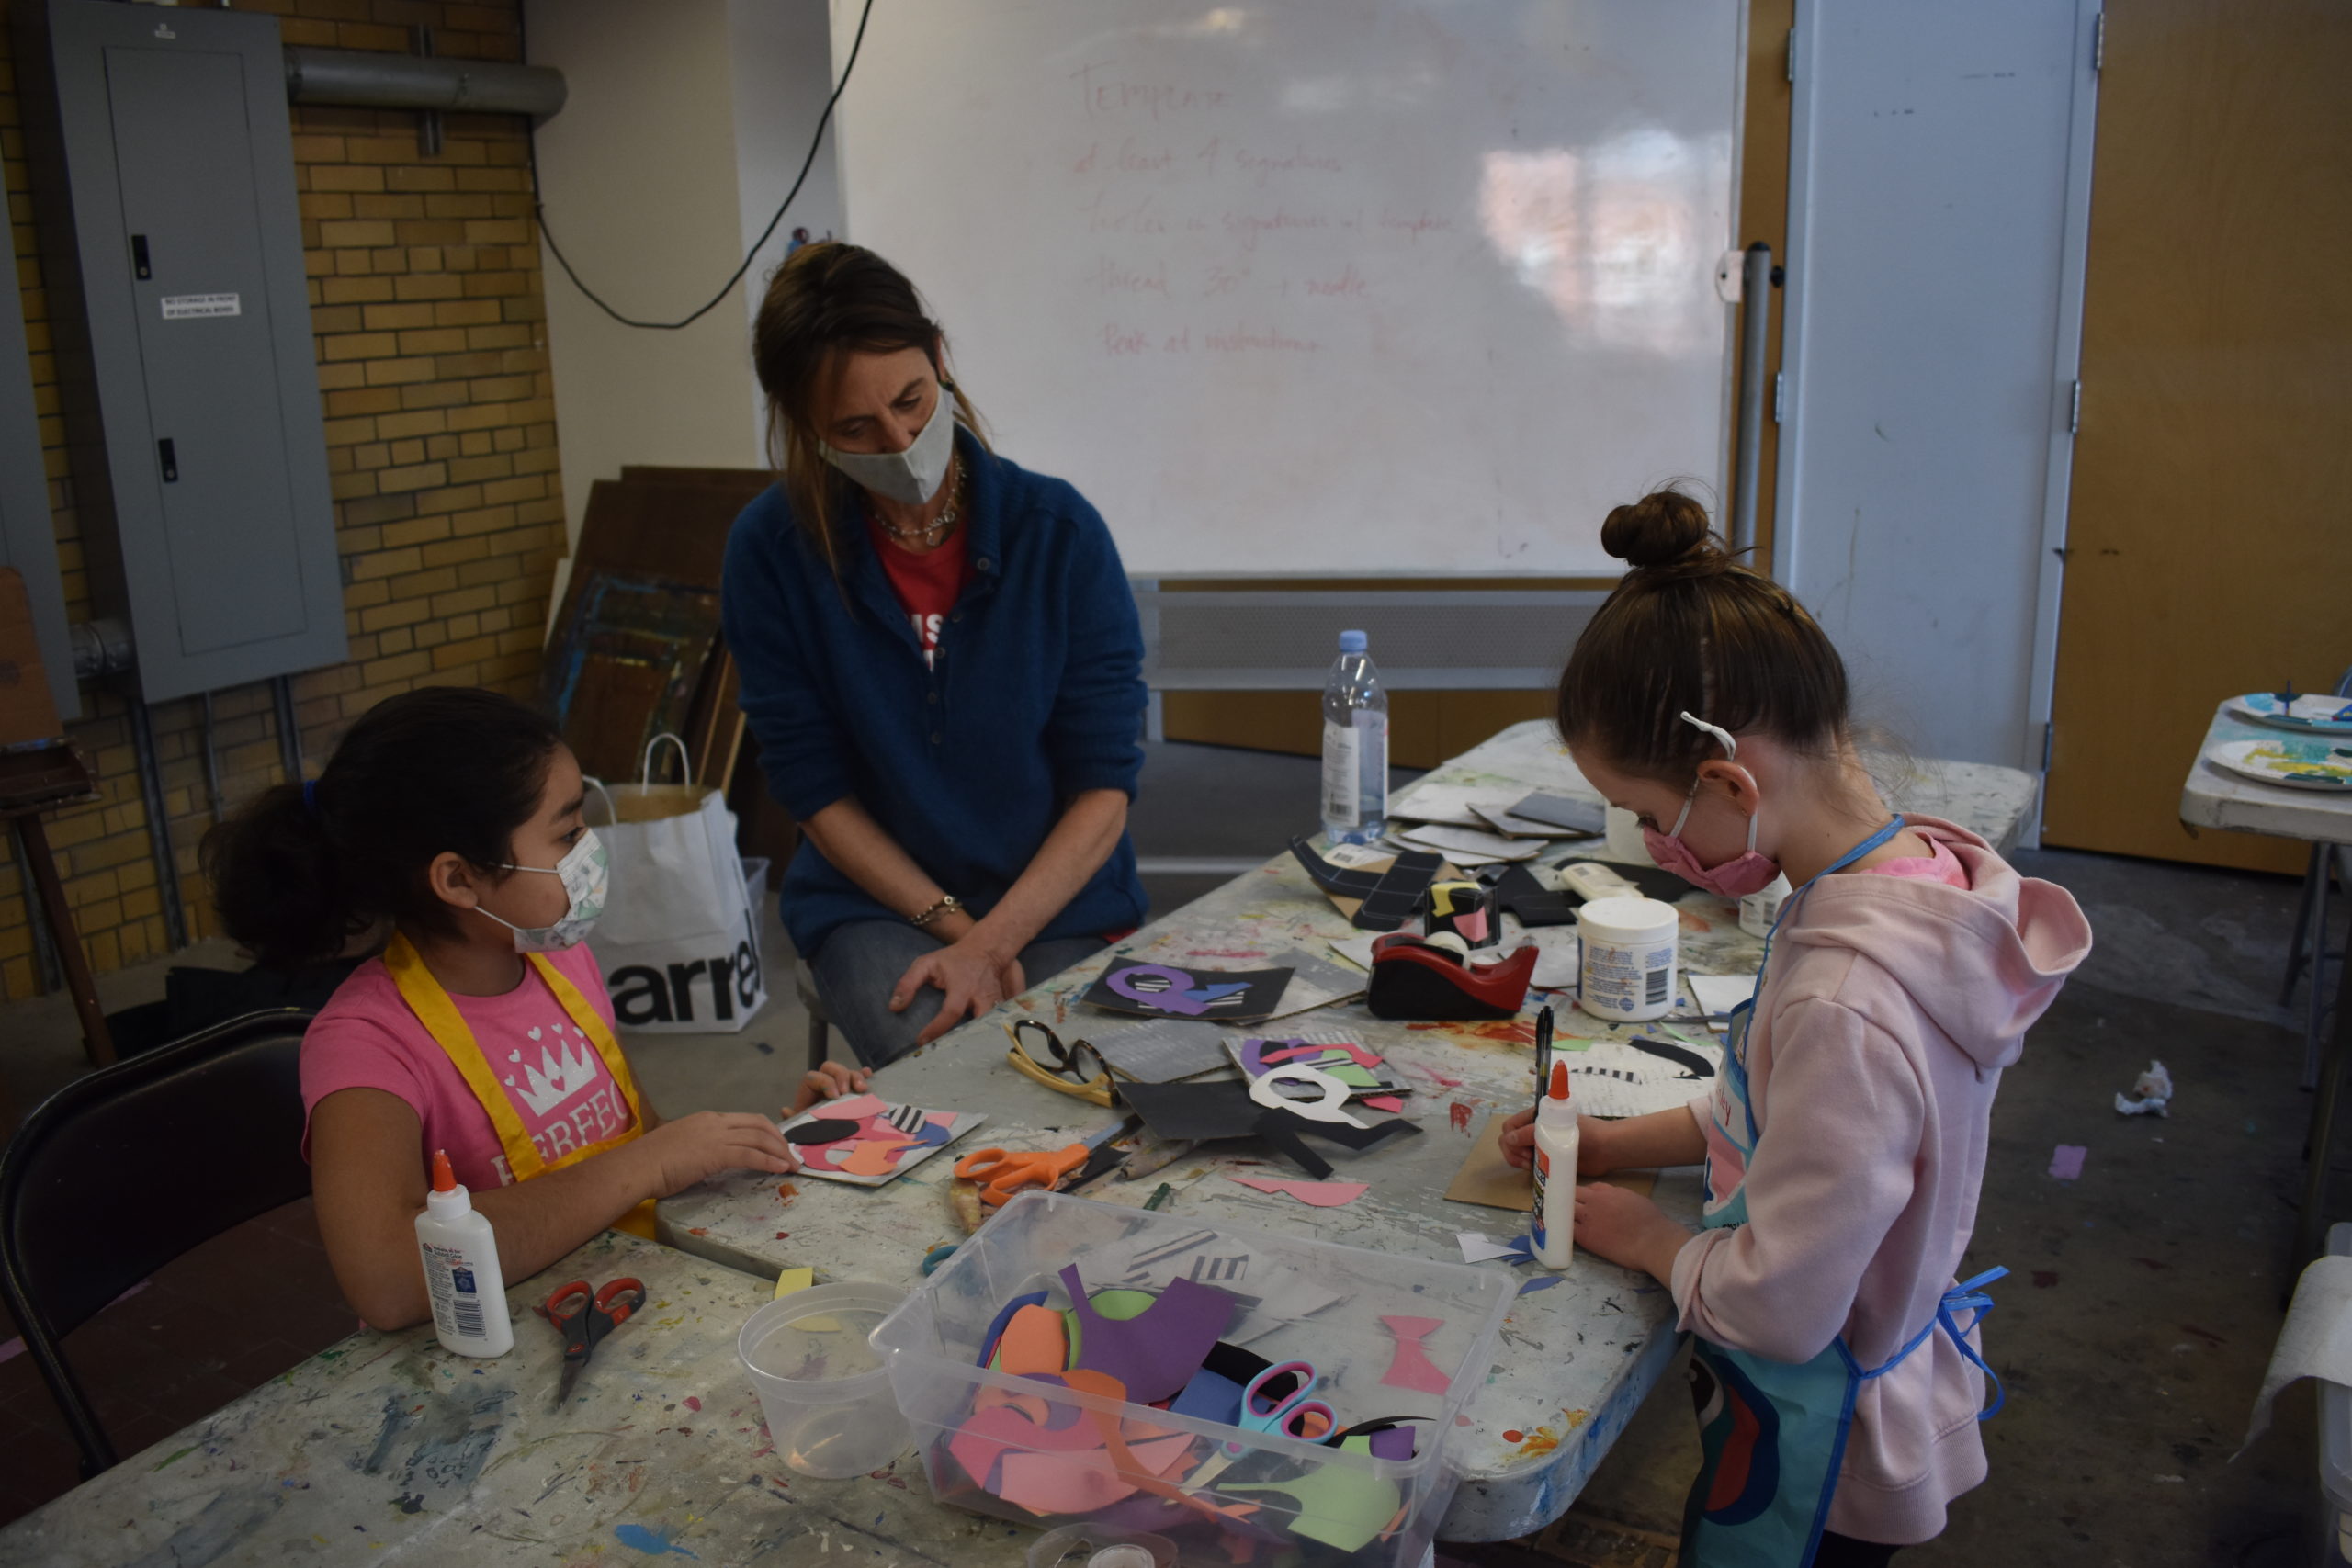 Two children in an art studio working with an adult on a craft project